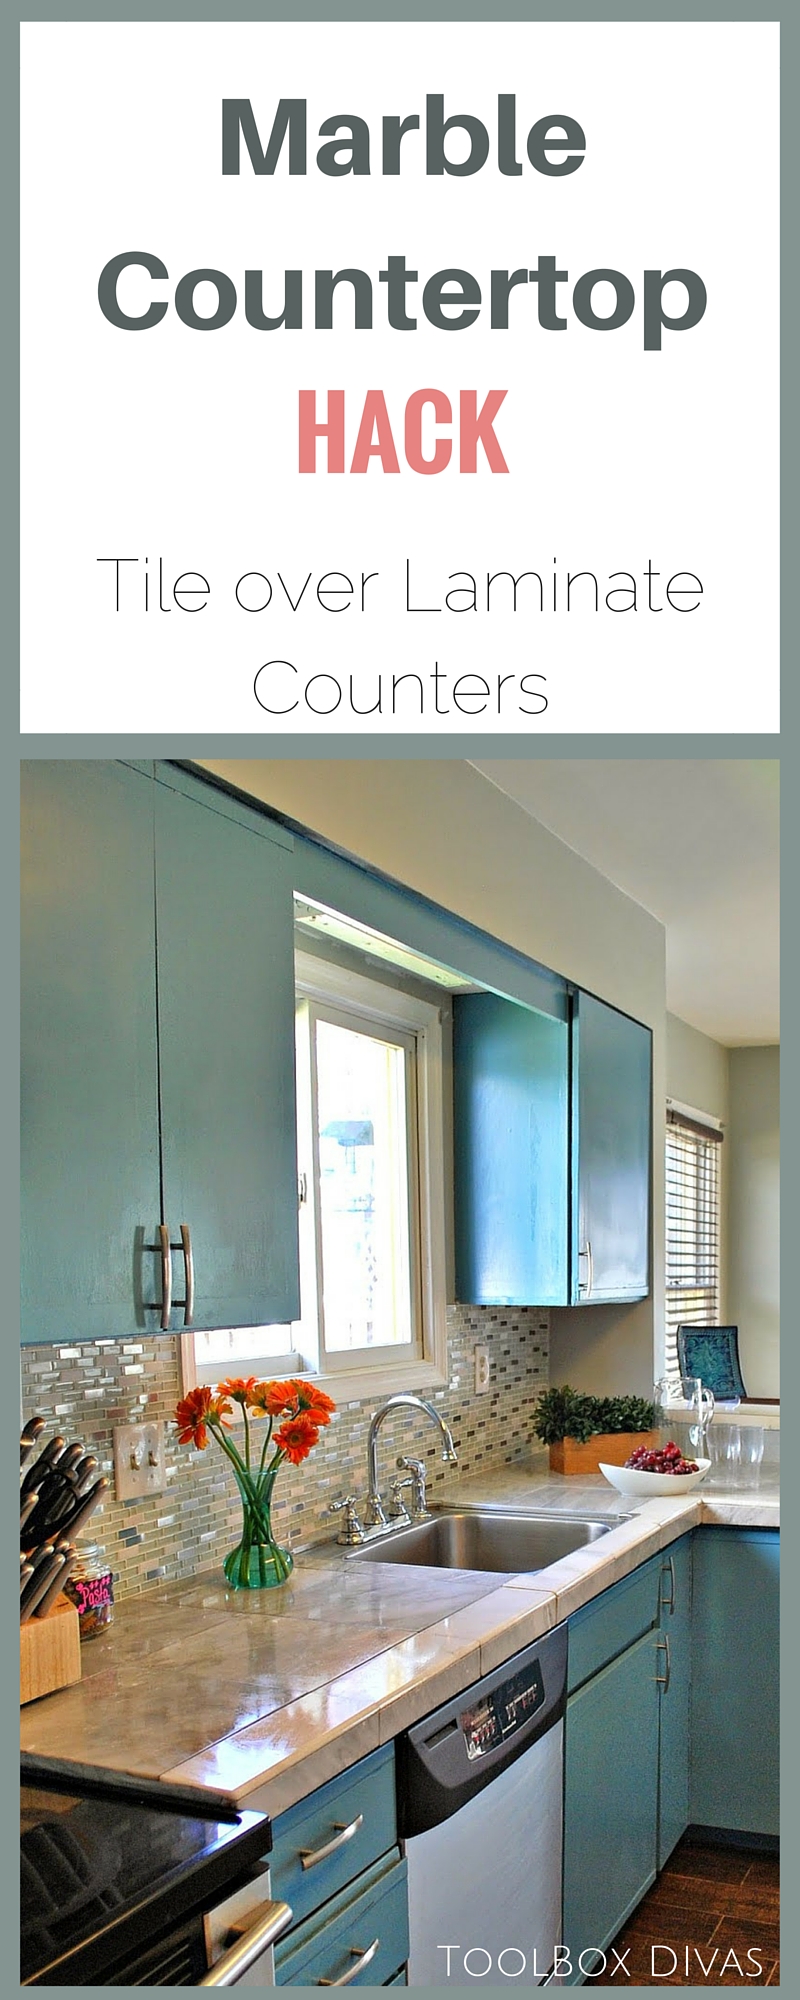 Tile Over Laminate Countertops, How To Install Tile Over Formica Countertops